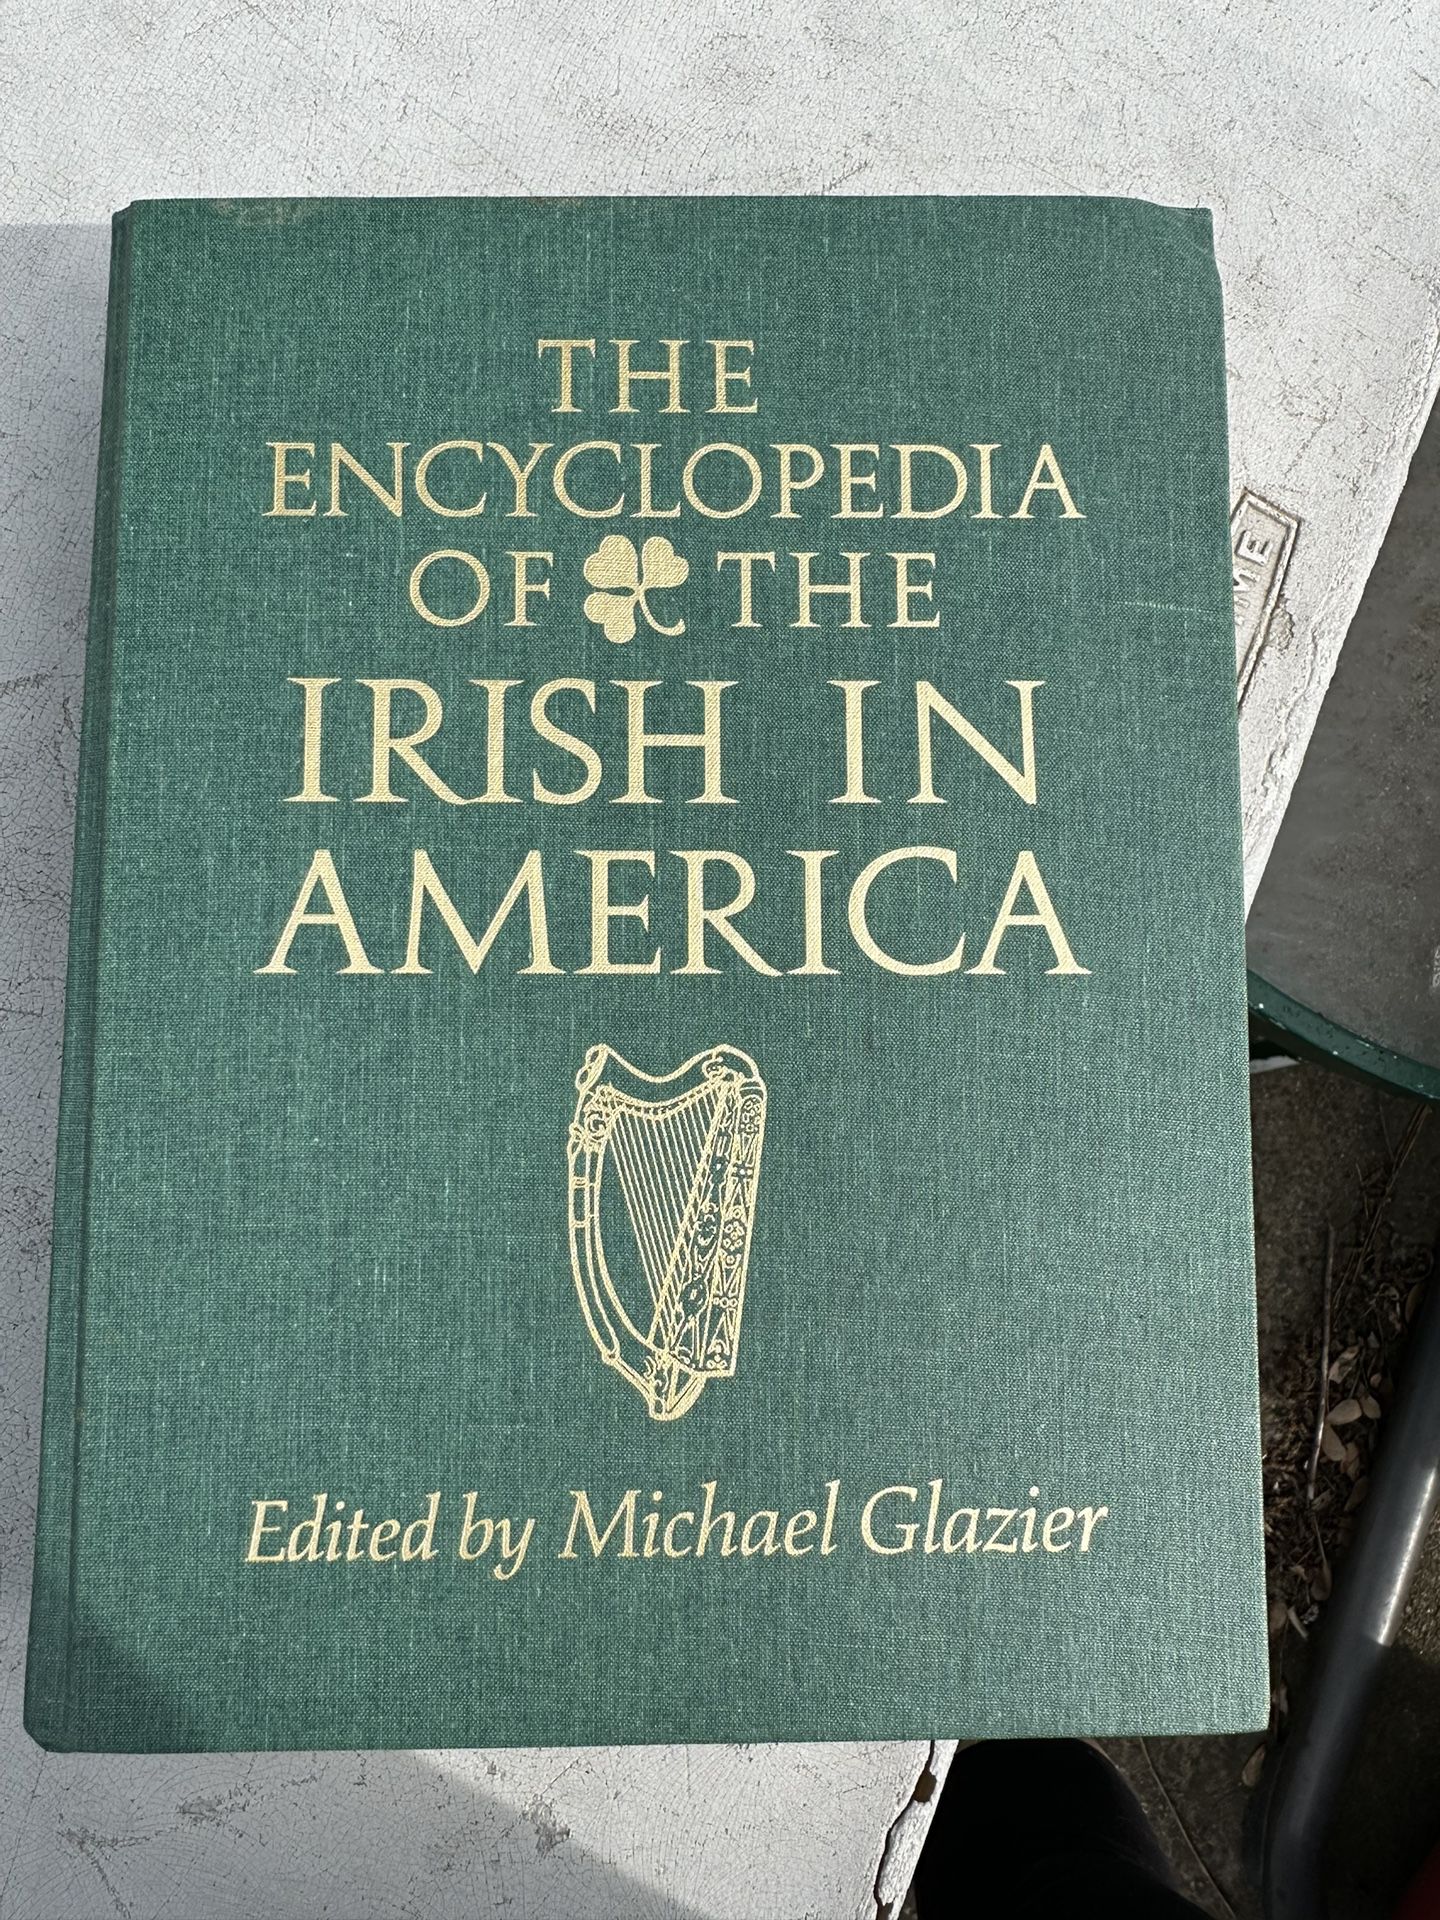 The Encyclopedia of the Irish in America Edited by Michael Glazier